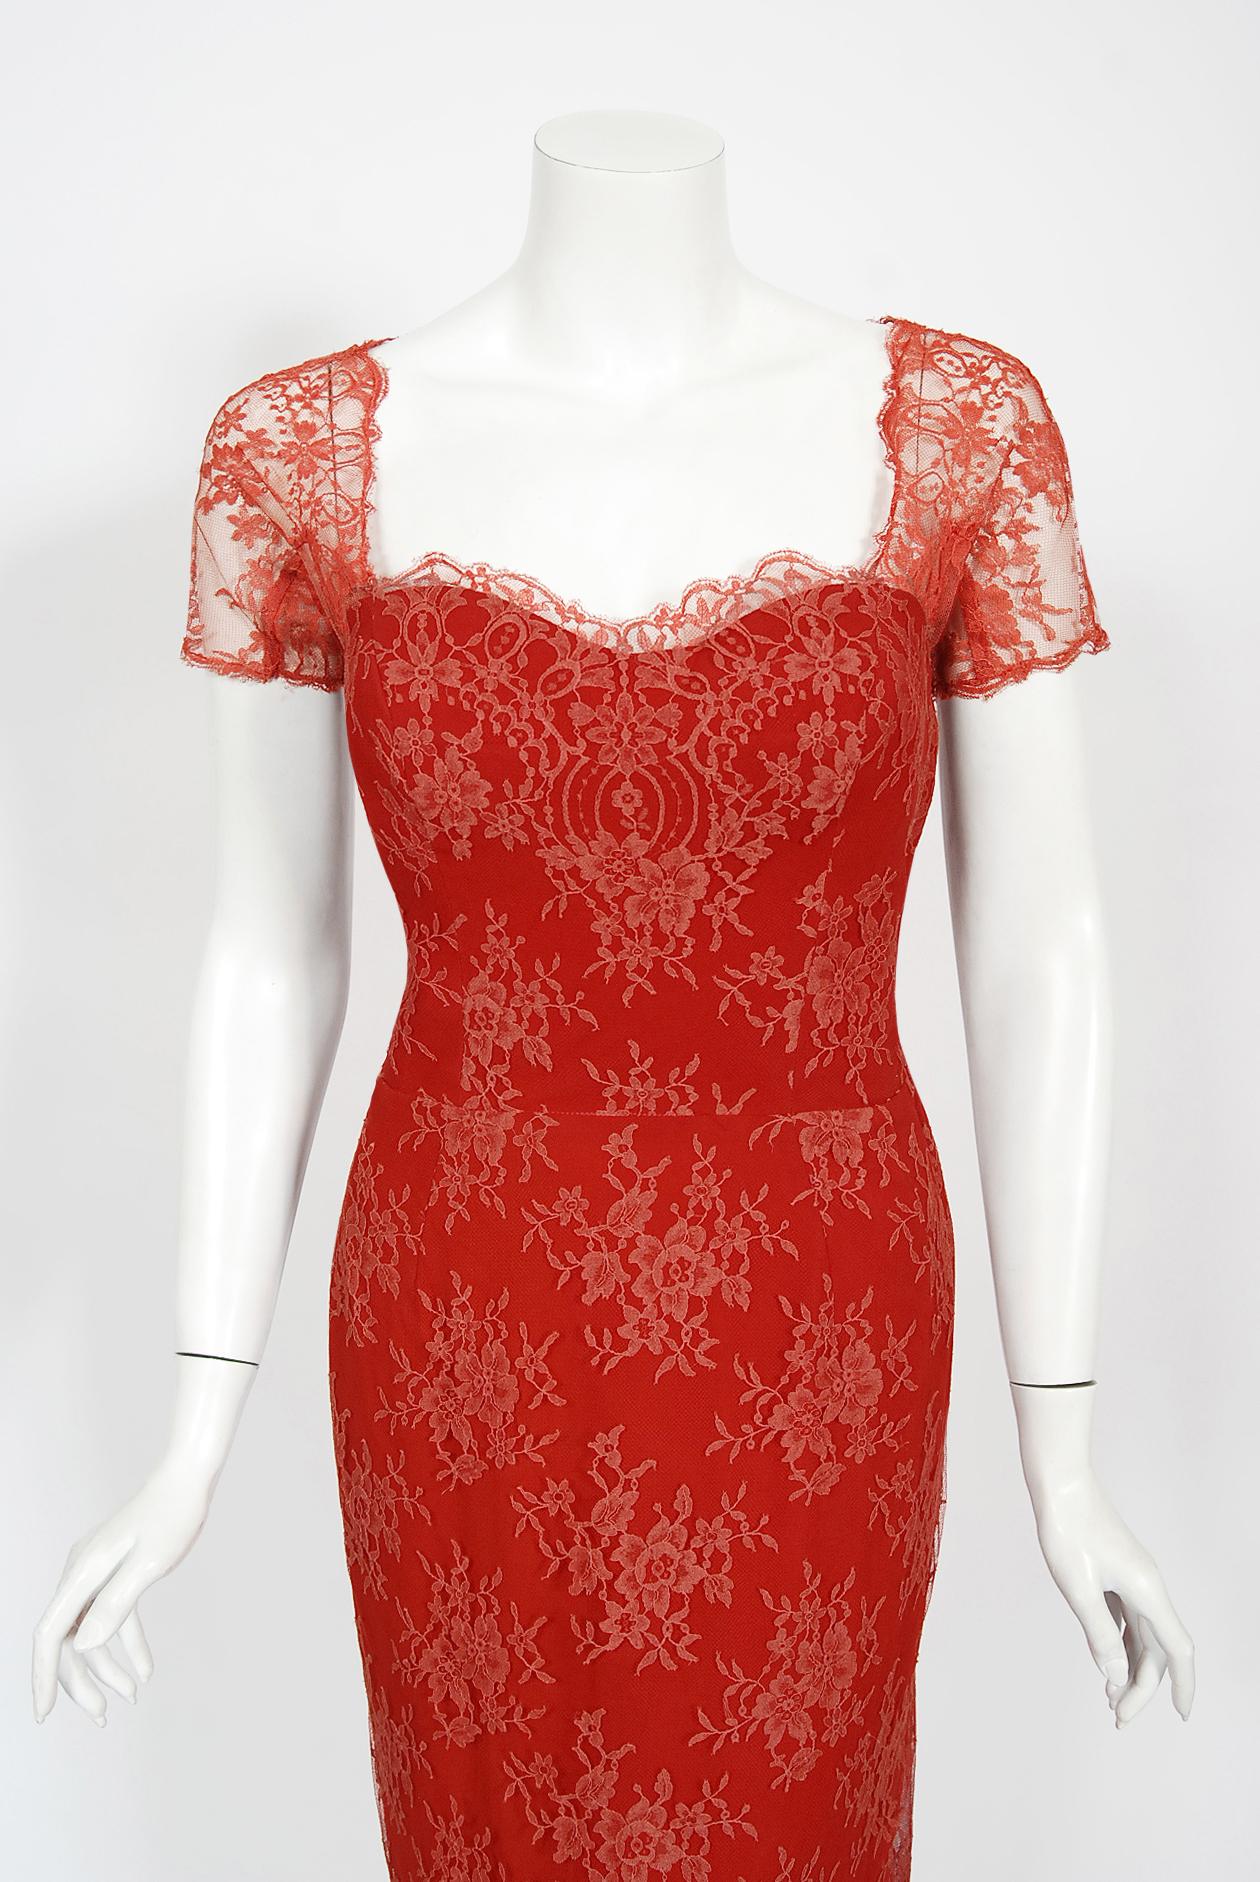 An absolutely gorgeous Luis Estévez couture red chantilly-lace and silk satin hourglass cocktail dress dating back to the late 1950's. Starting out at Patou in Paris, Estévez went on to design under his own name to great acclaim in 1955. He was